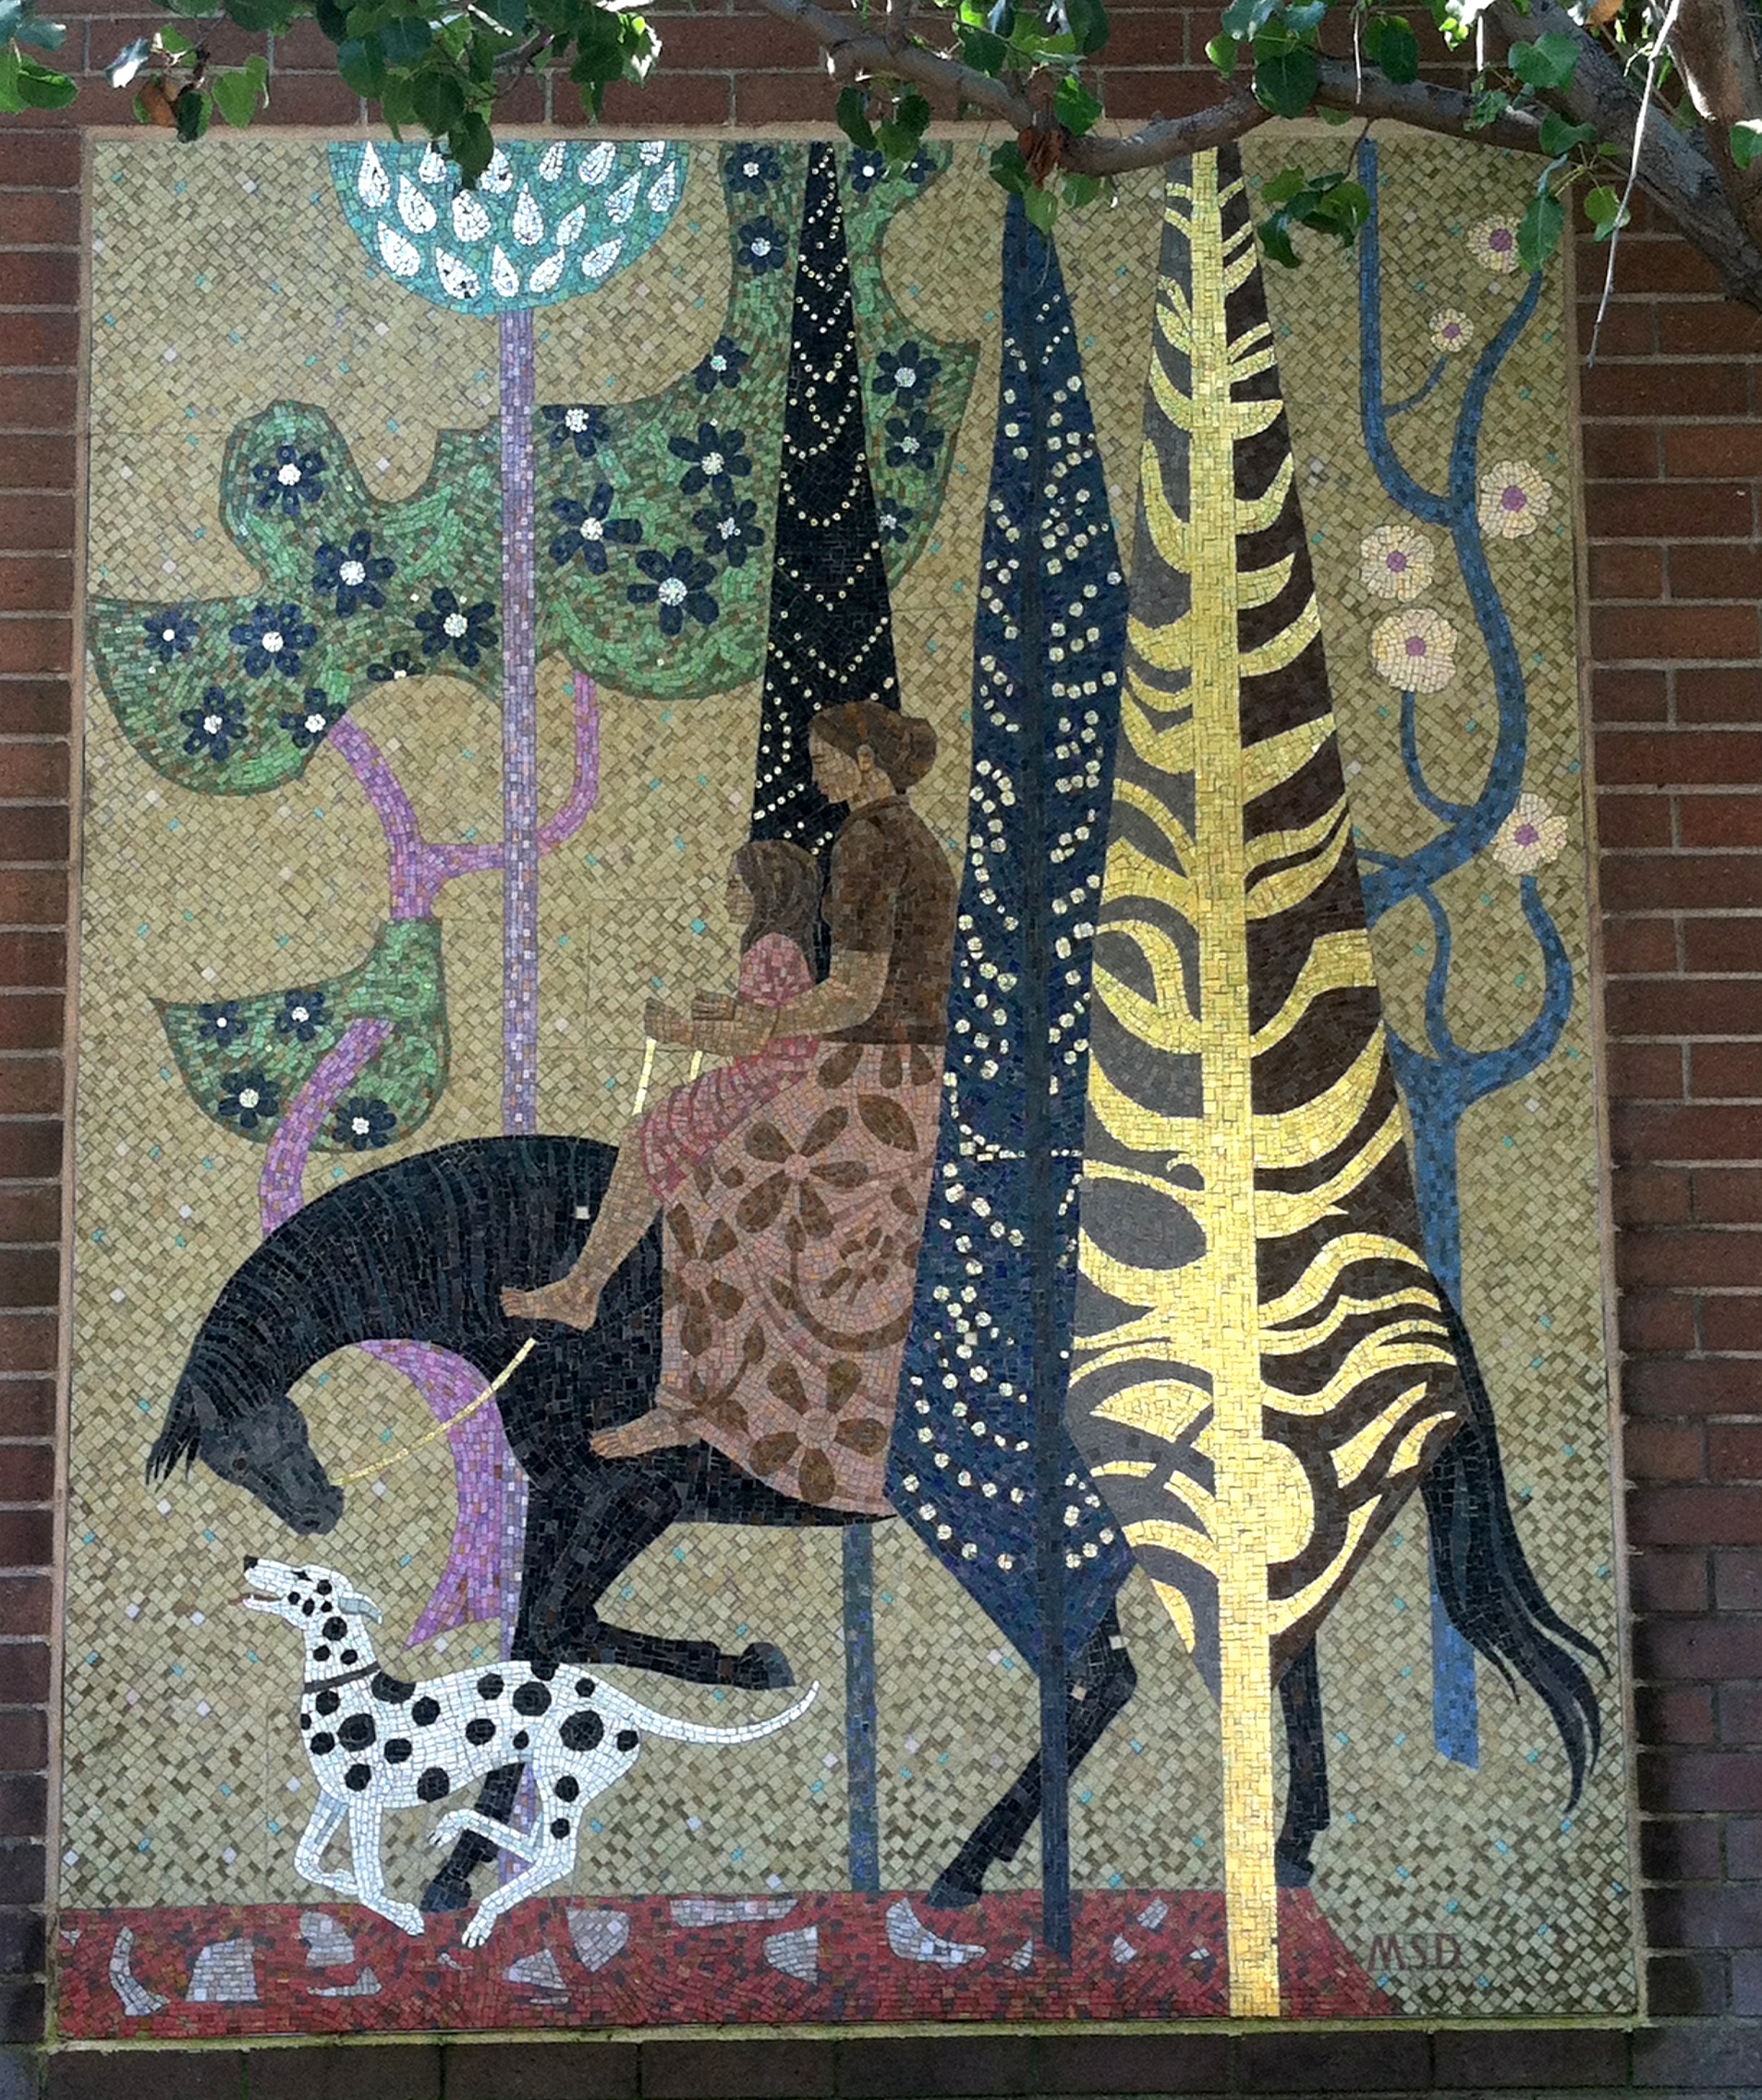 "Millard Sheets Designs," temporary mosaic panel, one of three, c. 1974, now in Irwindale